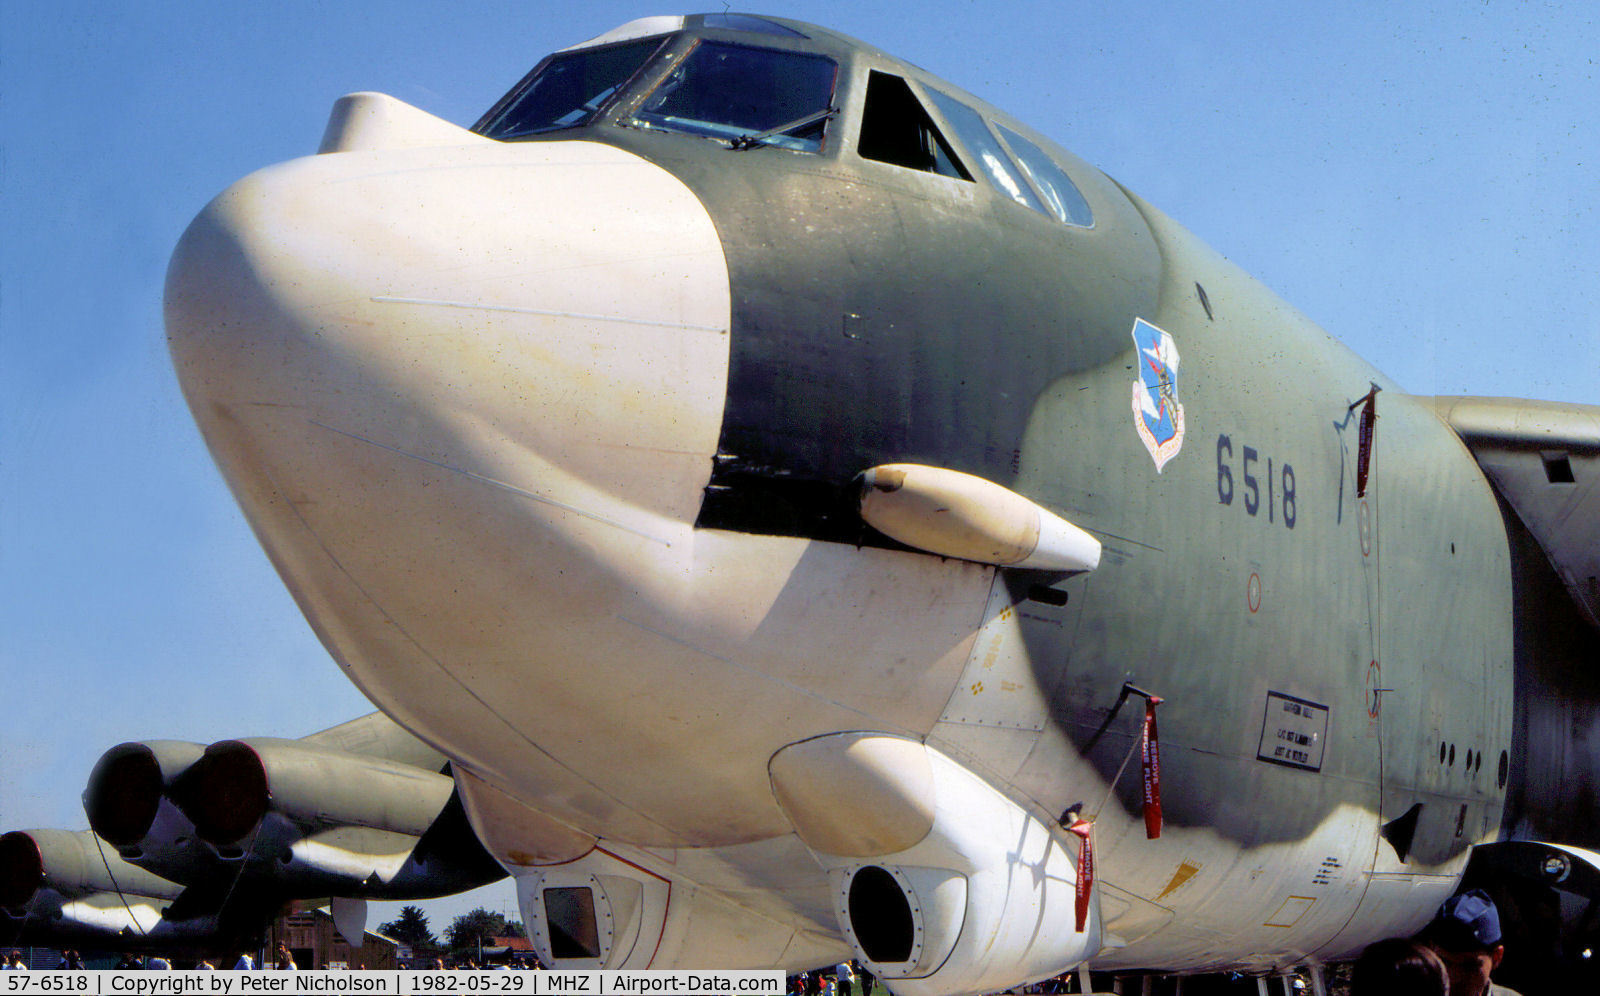 57-6518, 1957 Boeing B-52G Stratofortress C/N 464223, B-52G Stratofortress of 2nd Bomb Wing at Barksdale AFB on display at the 1982 RAF Mildenhall Air Fete.